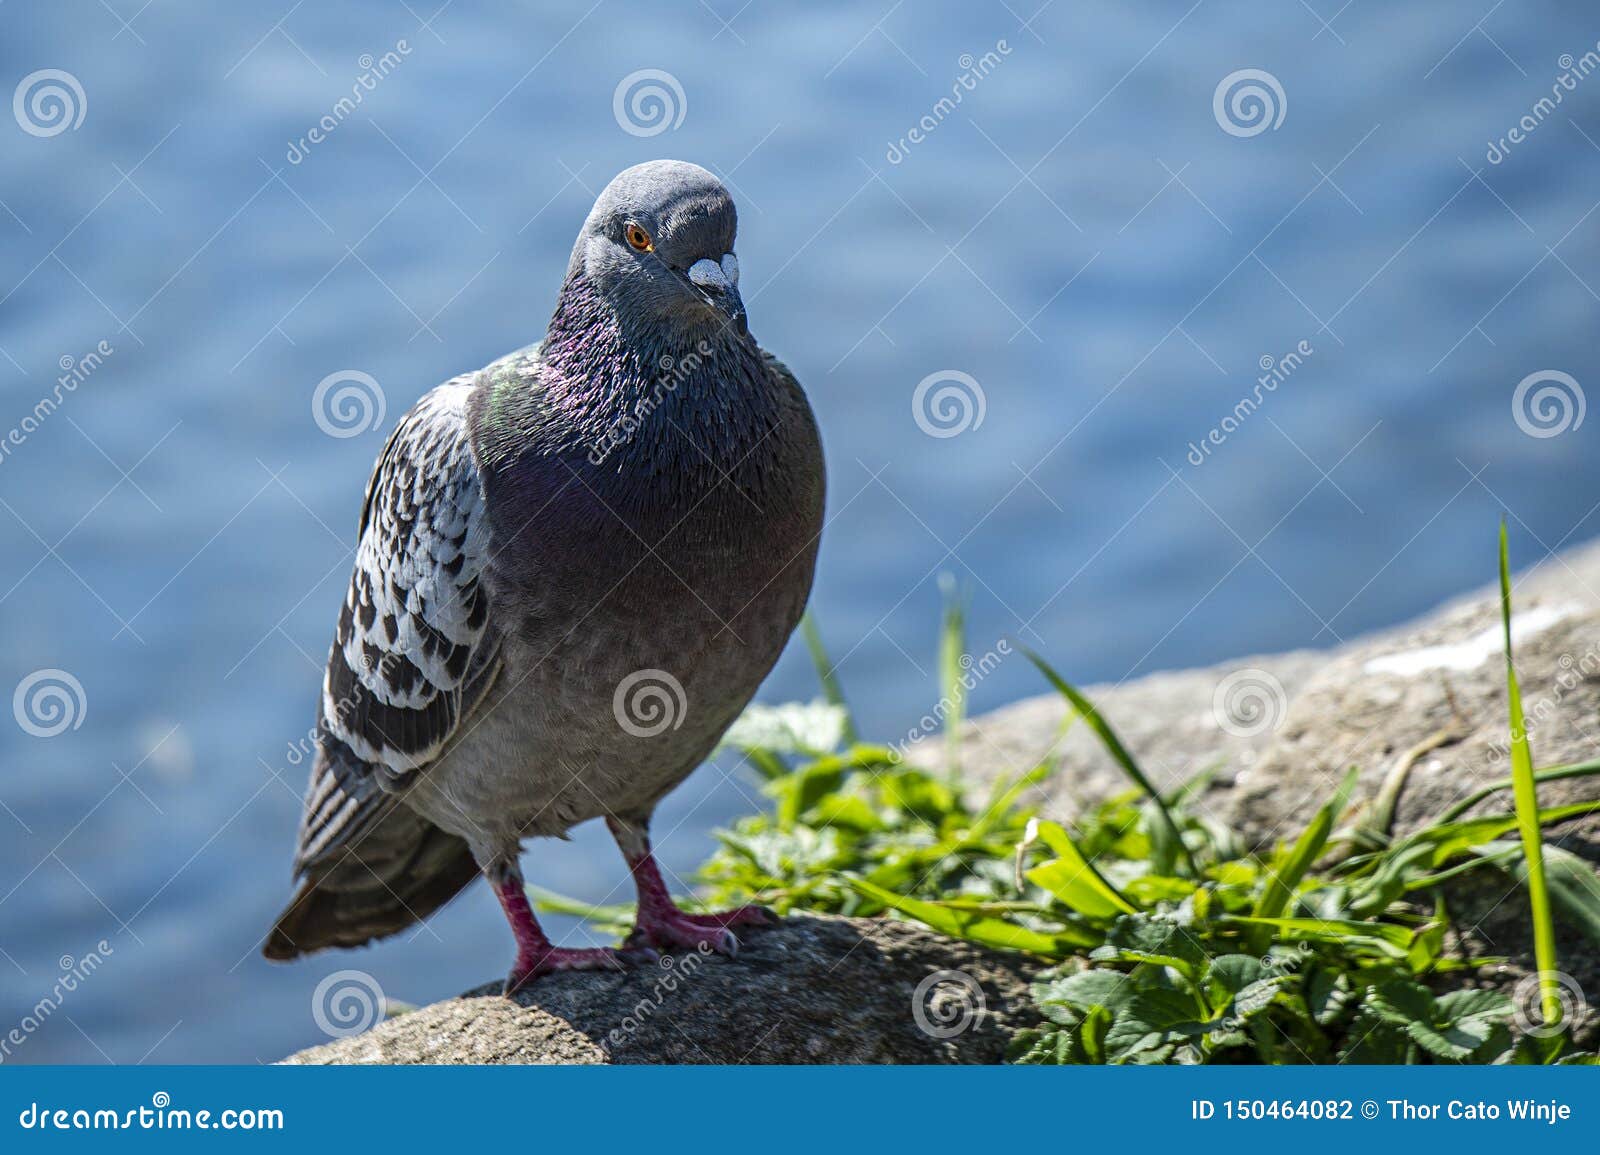 a blueish dove sits by a pond.